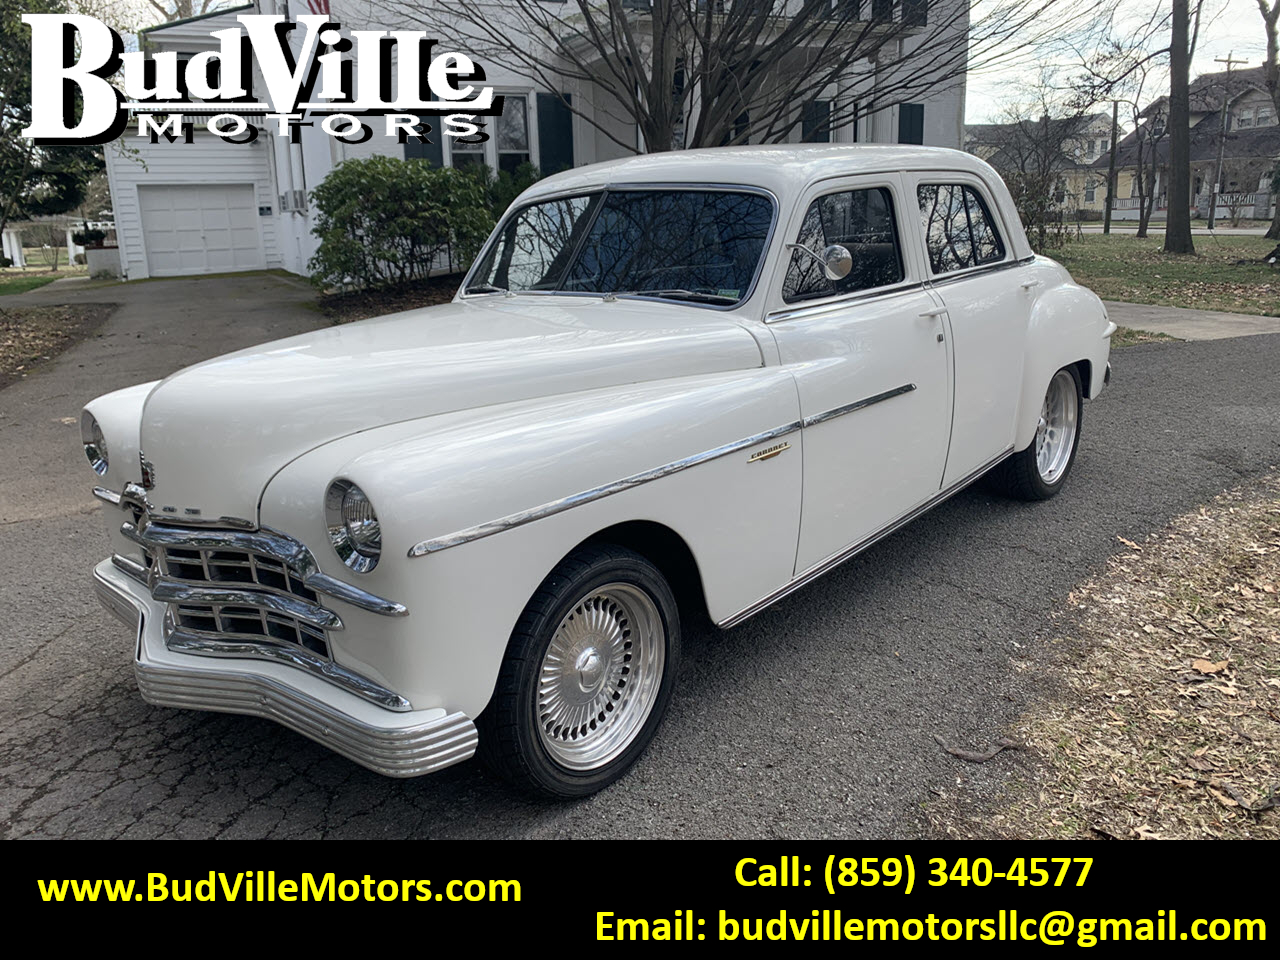 Budville Motors | Used Classic Cars Central Kentucky for Sale Paris KY